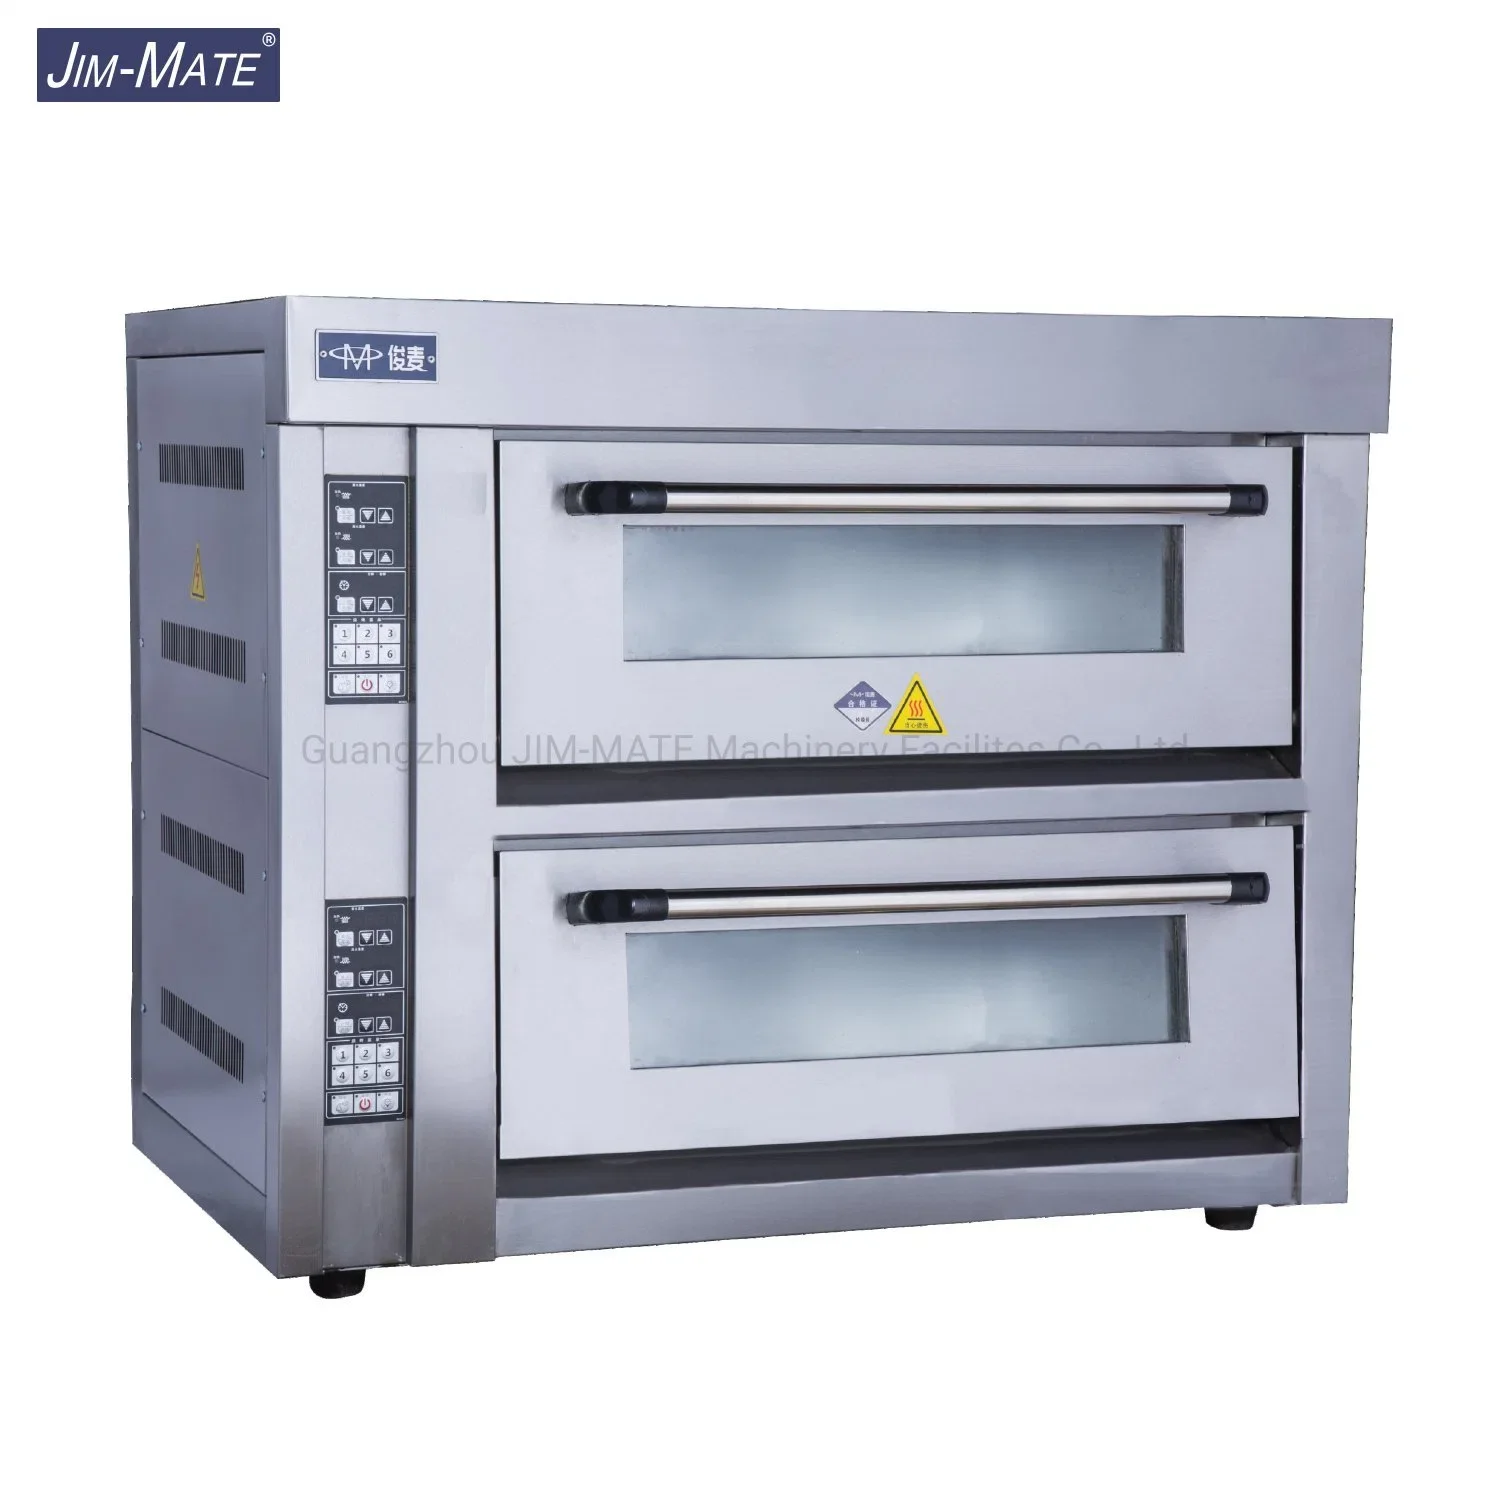 Bakery Equipment Furnace 2 Decks 2 Trays Commercial Electric Deck Oven dental lab wax burnout furnace dental furnace for wax oven